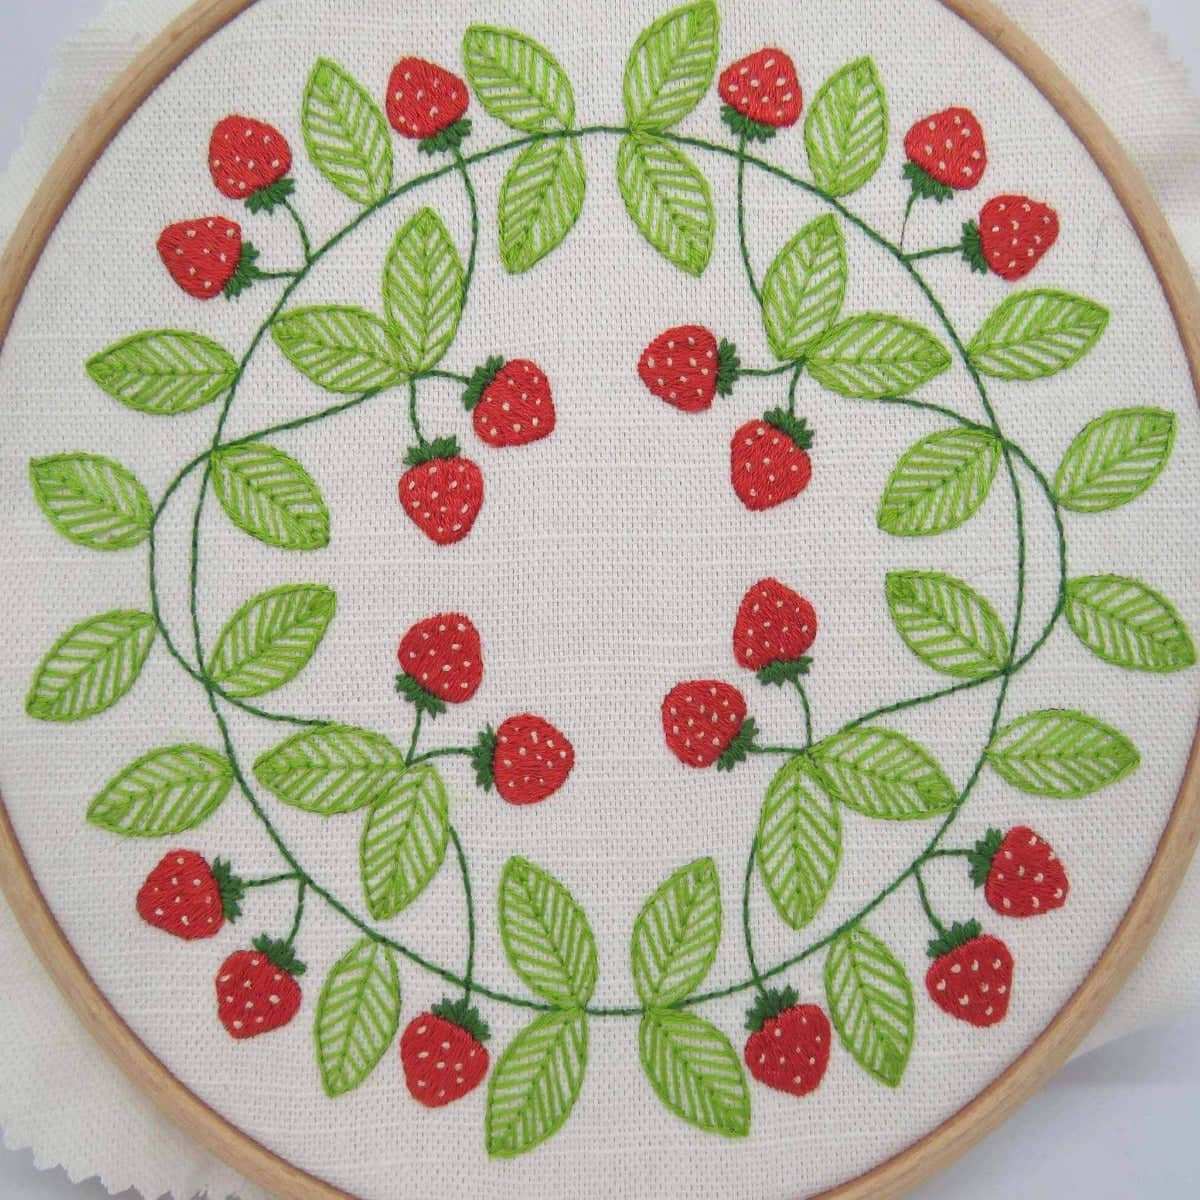 Strawberry Swirl, Hand Embroidery Pattern , PDF Download , StitchDoodles , embroidery hoop kit, embroidery kit for adults, embroidery kit for beginners, embroidery kits for adults, embroidery kits for beginers, hand embroidery, modern embroidery kits, PDF pattern , StitchDoodles , shop.stitchdoodles.com